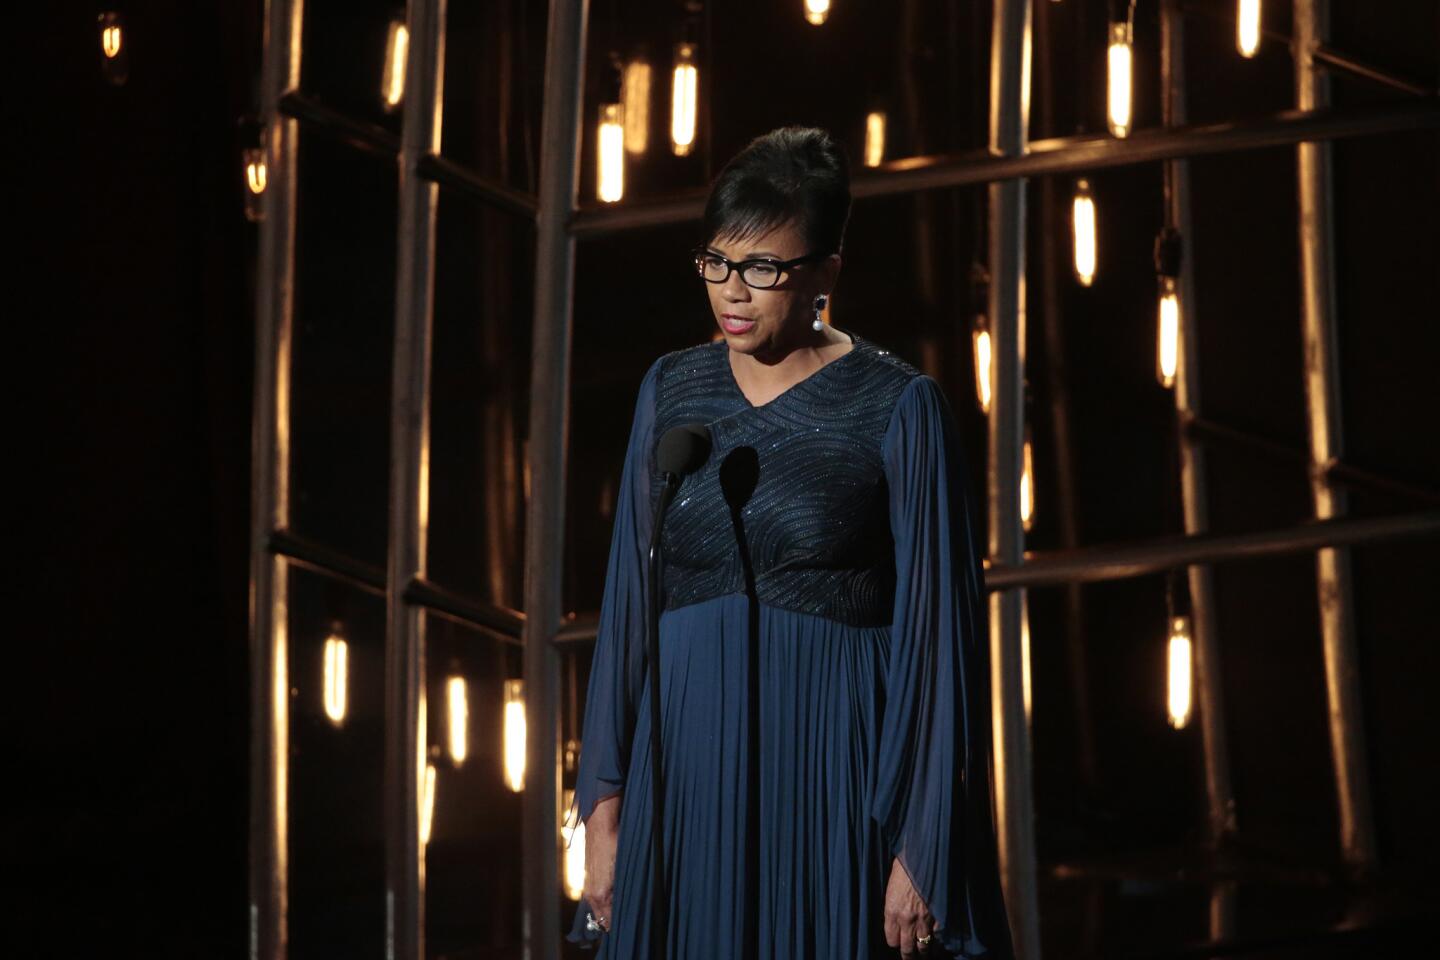 Academy of Motion Picture Arts and Sciences President Cheryl Boone Isaacs speaks at the Oscars.